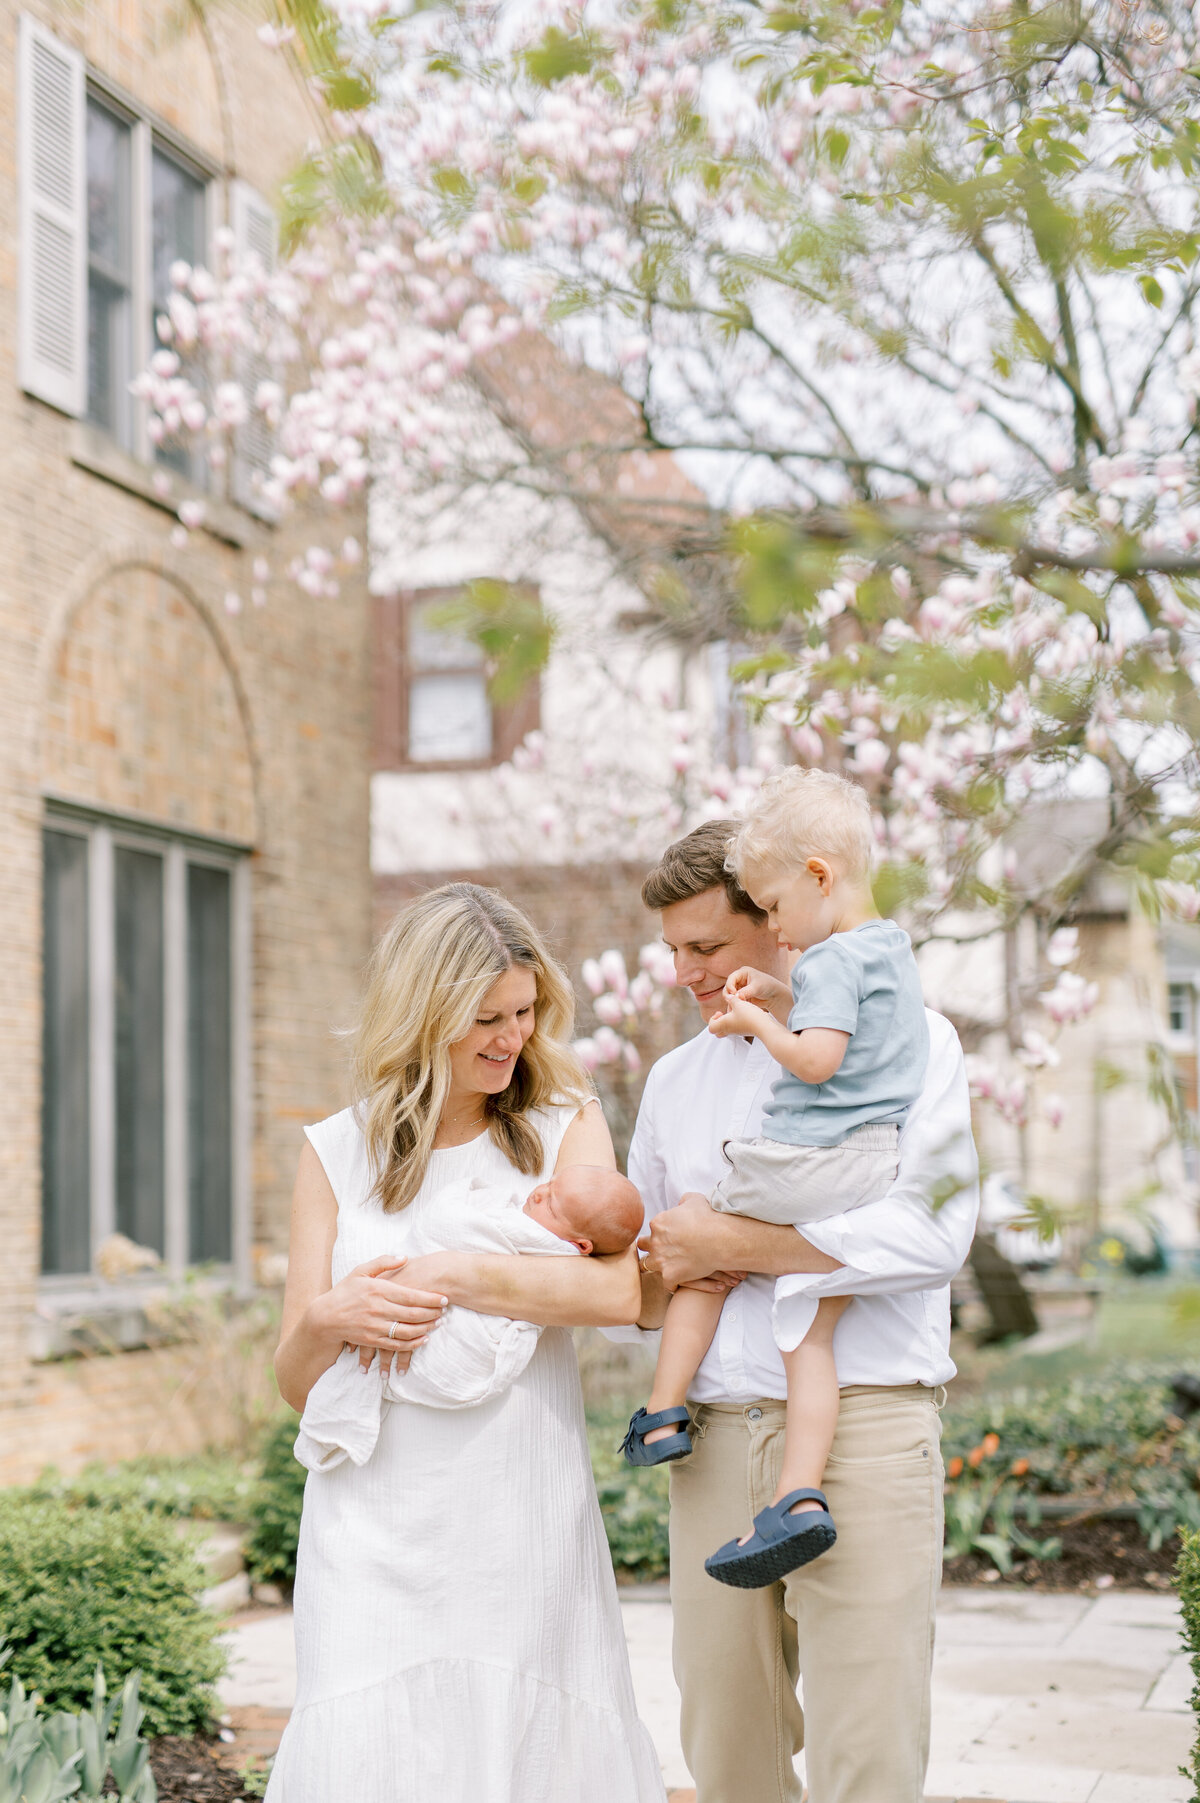 Outdoor family photo taken in Shorewood, Wisconsin of a family of four. Dad is holding the toddler and mom holds the baby during a photo session. Spring blooms are in the background